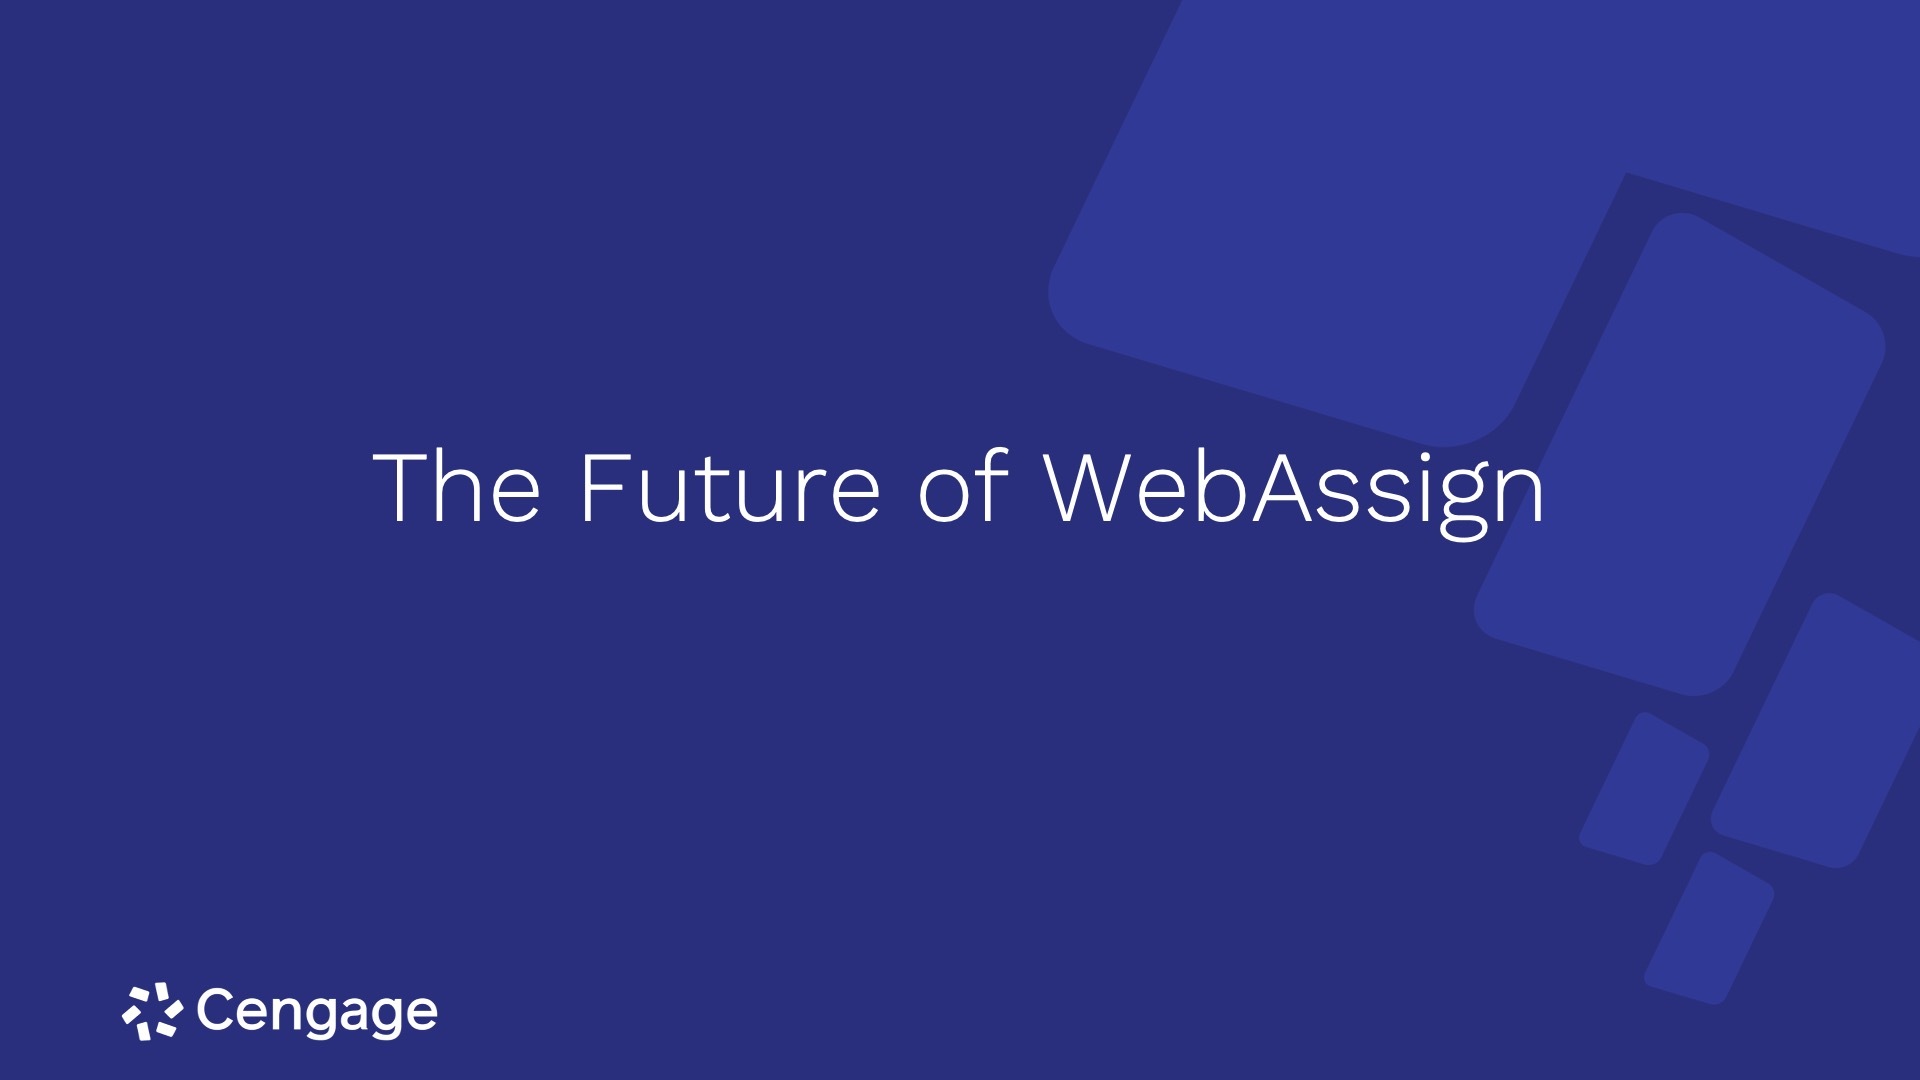 The Future of WebAssign